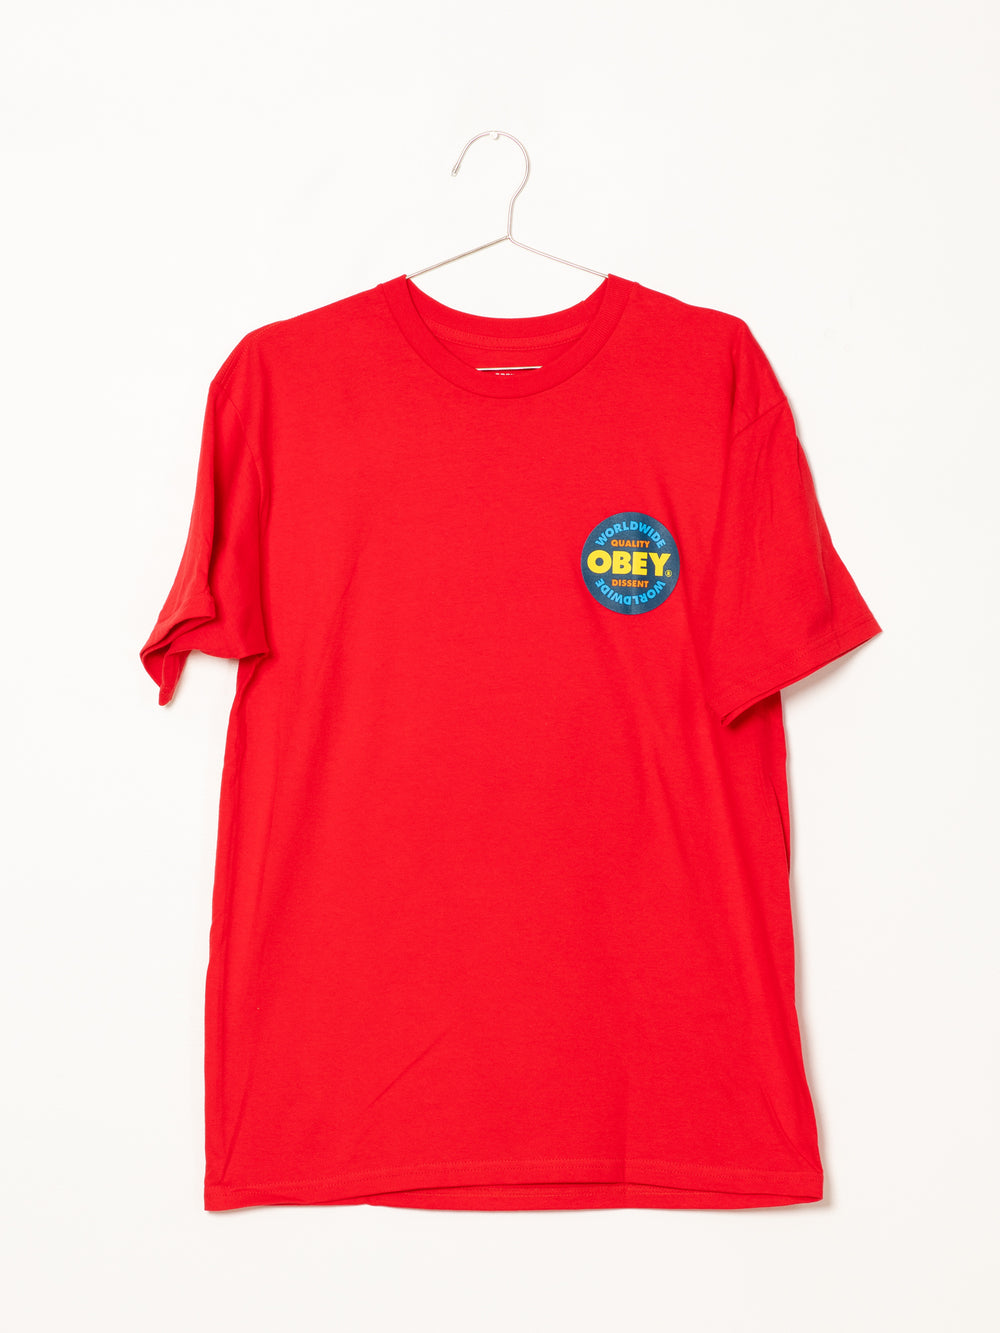 OBEY QUALITY DISSENT SHORT SLEEVE TEE - CLEARANCE